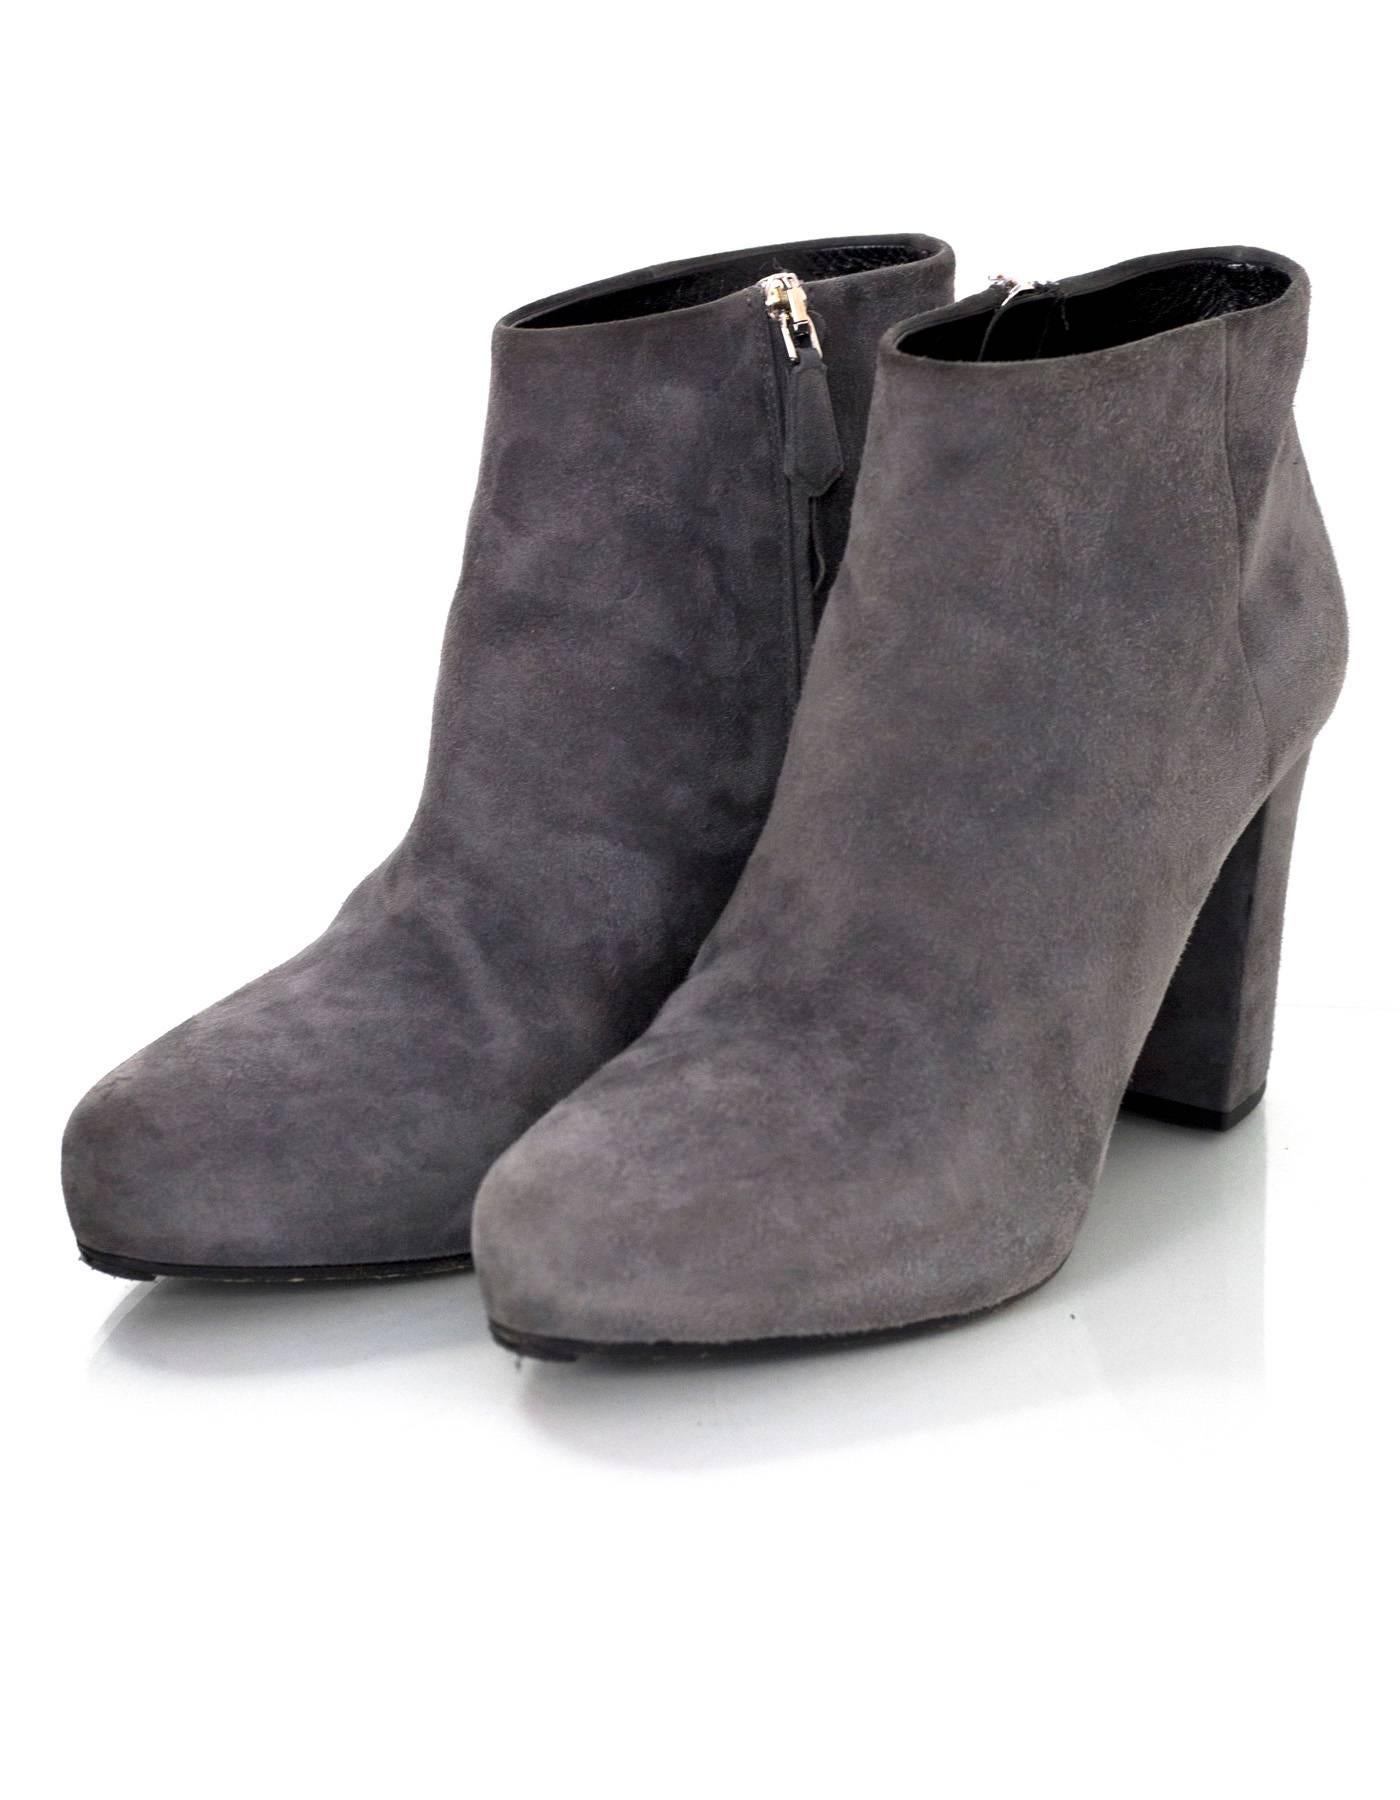 Prada Grey Suede Ankle Boots Sz 39

Made In: Italy
Color: Grey
Materials: Suede
Closure/Opening: Side zip closure
Sole Stamp: Prada 39 Made in Italy
Overall Condition: Very good pre-owned condition with the exception of some wear at outsoles, toe